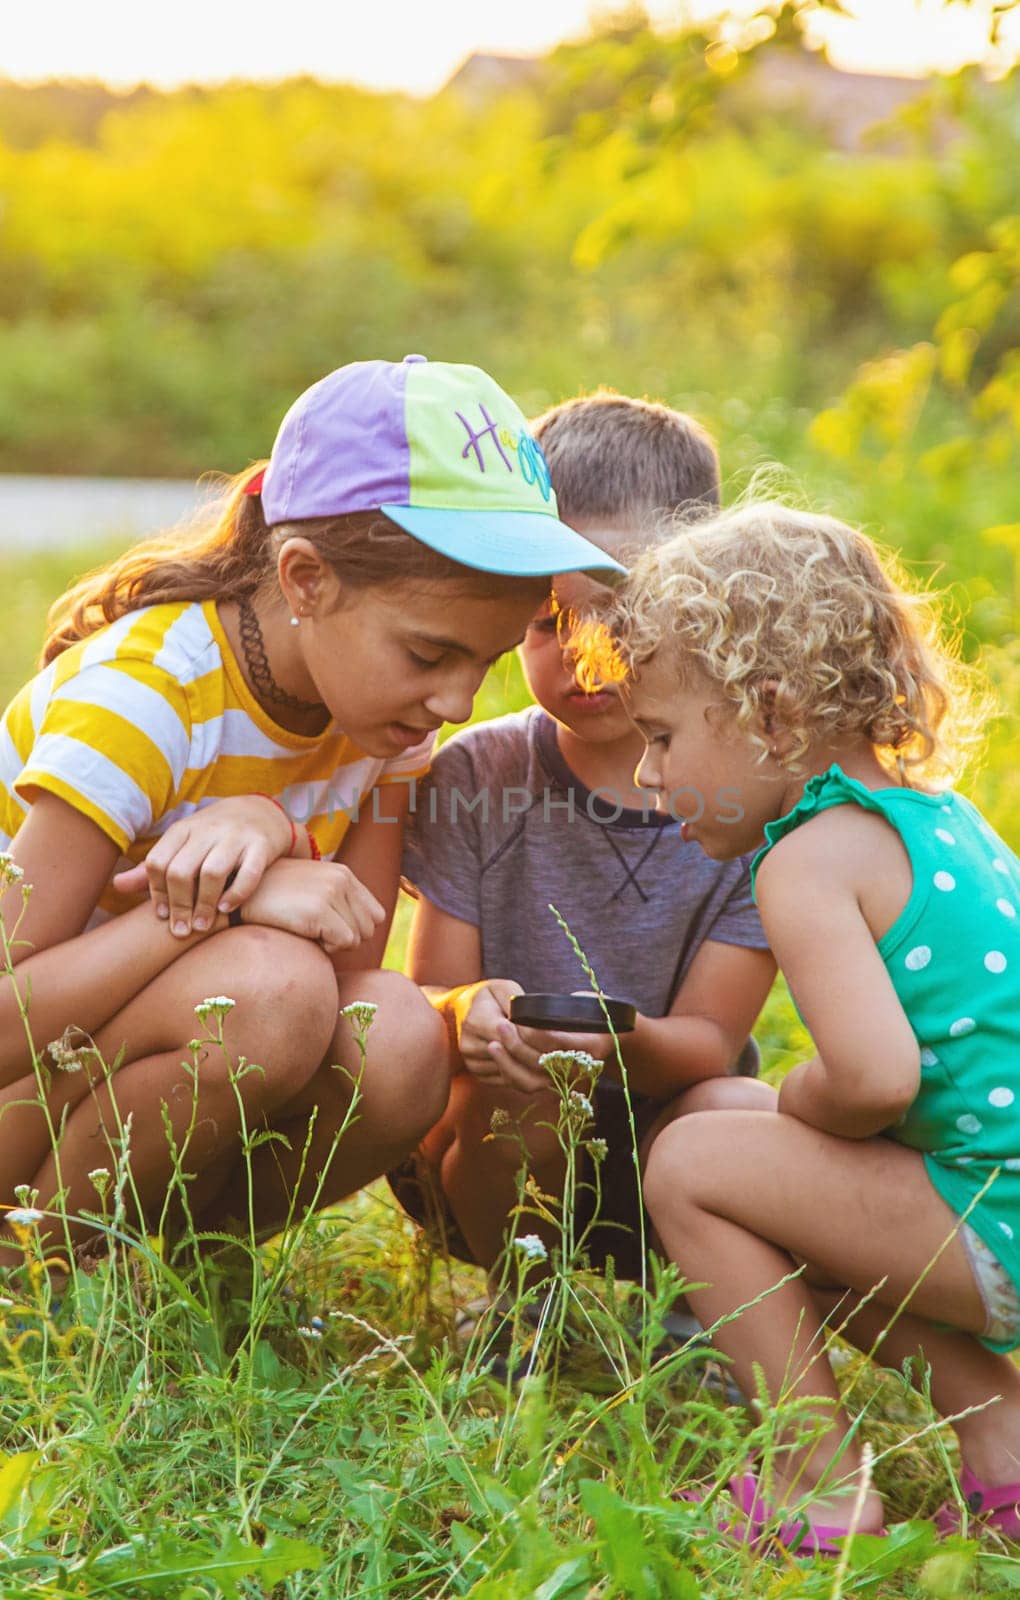 Children look through a magnifying glass together at the plants in the garden. Selective focus. Kid.